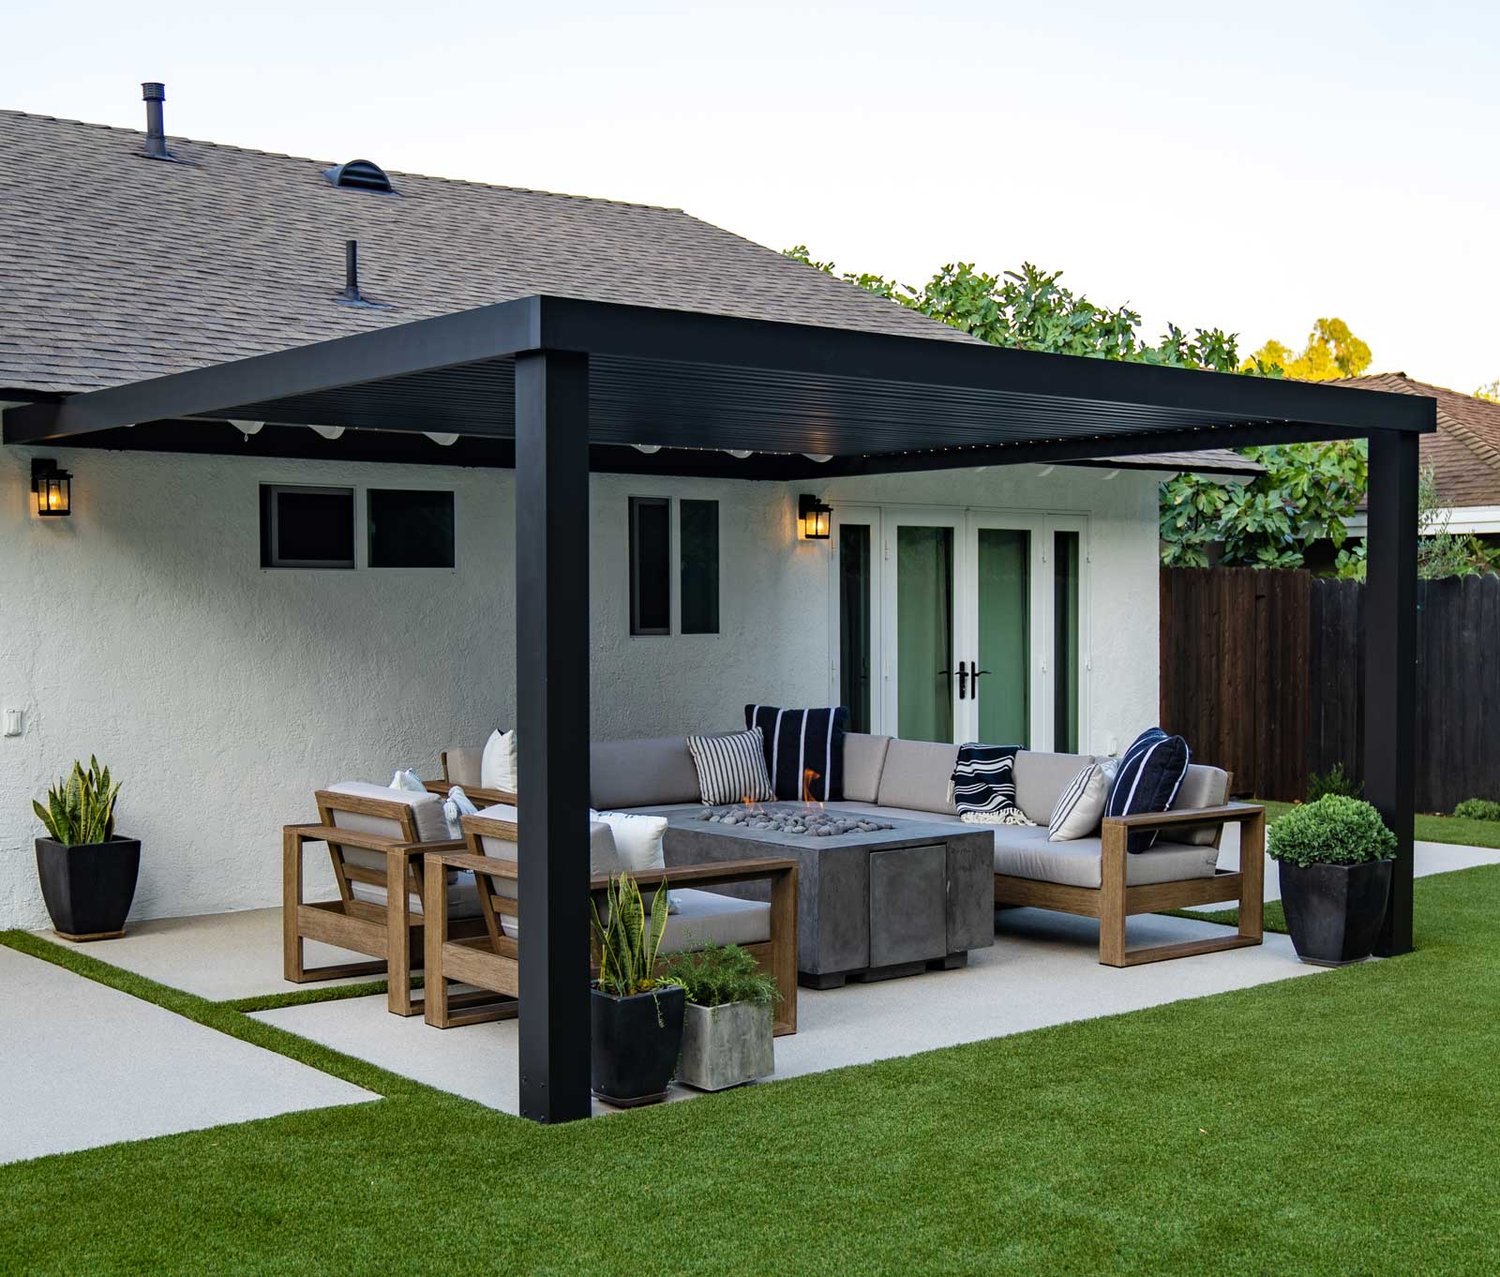 2022 Warm-Season Outdoor Living Trends: The New American Yard